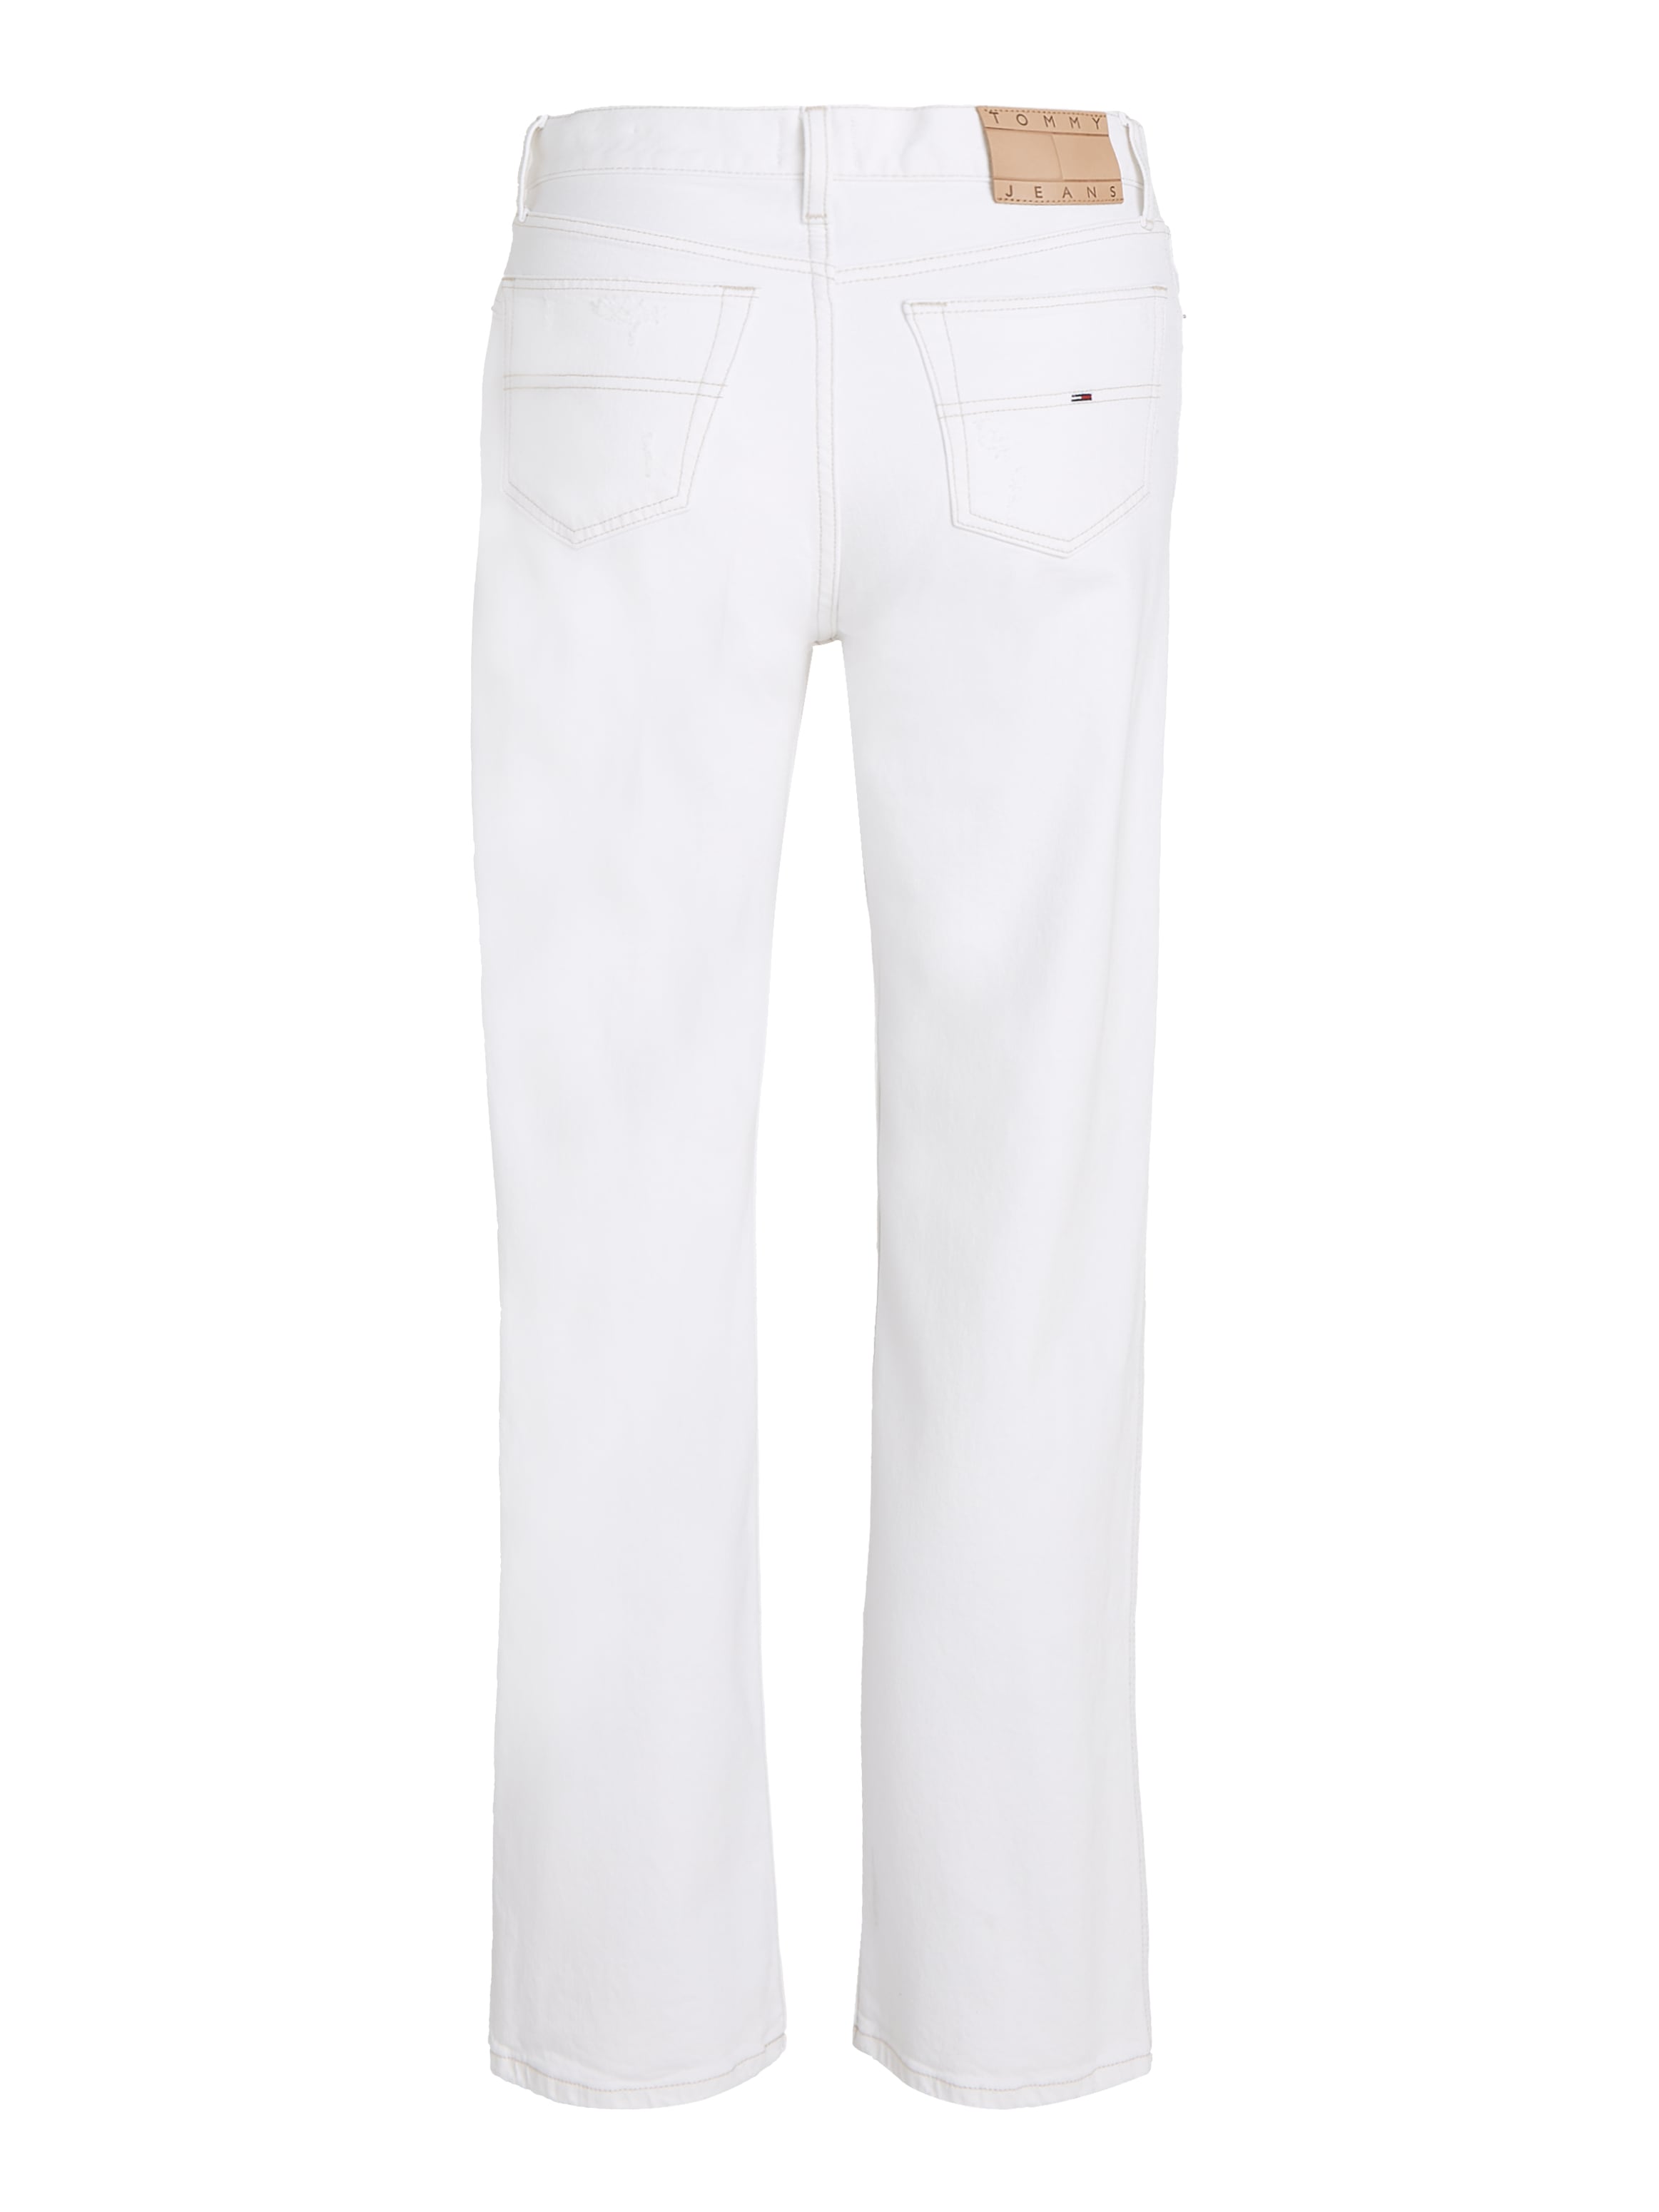 Weite bei Jeans LS Tommy Five CG4136«, Style »BETSY im Pocket Jeans MD OTTOversand